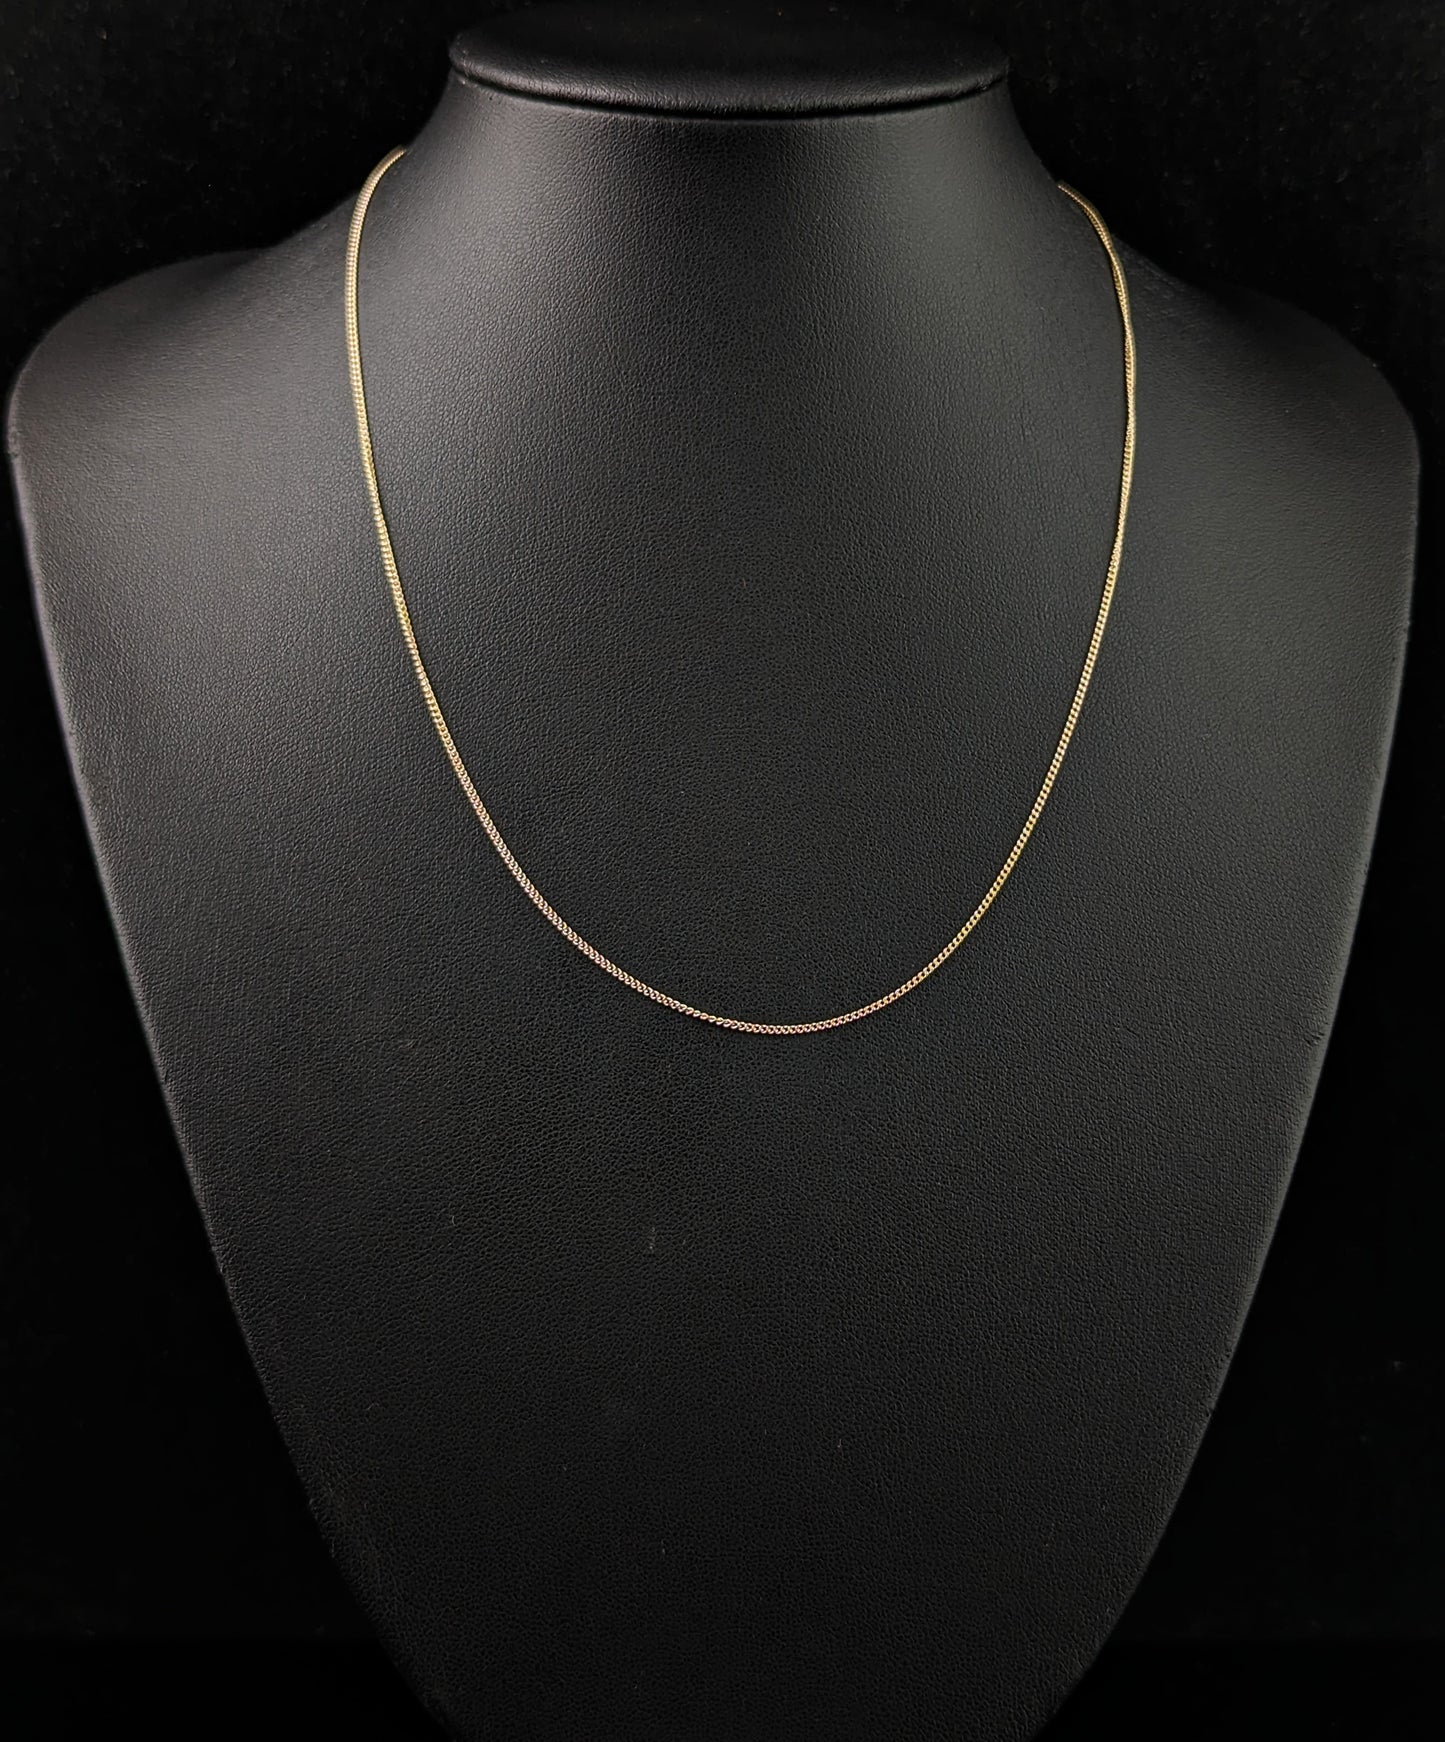 Vintage 9ct gold trace chain necklace, curb link